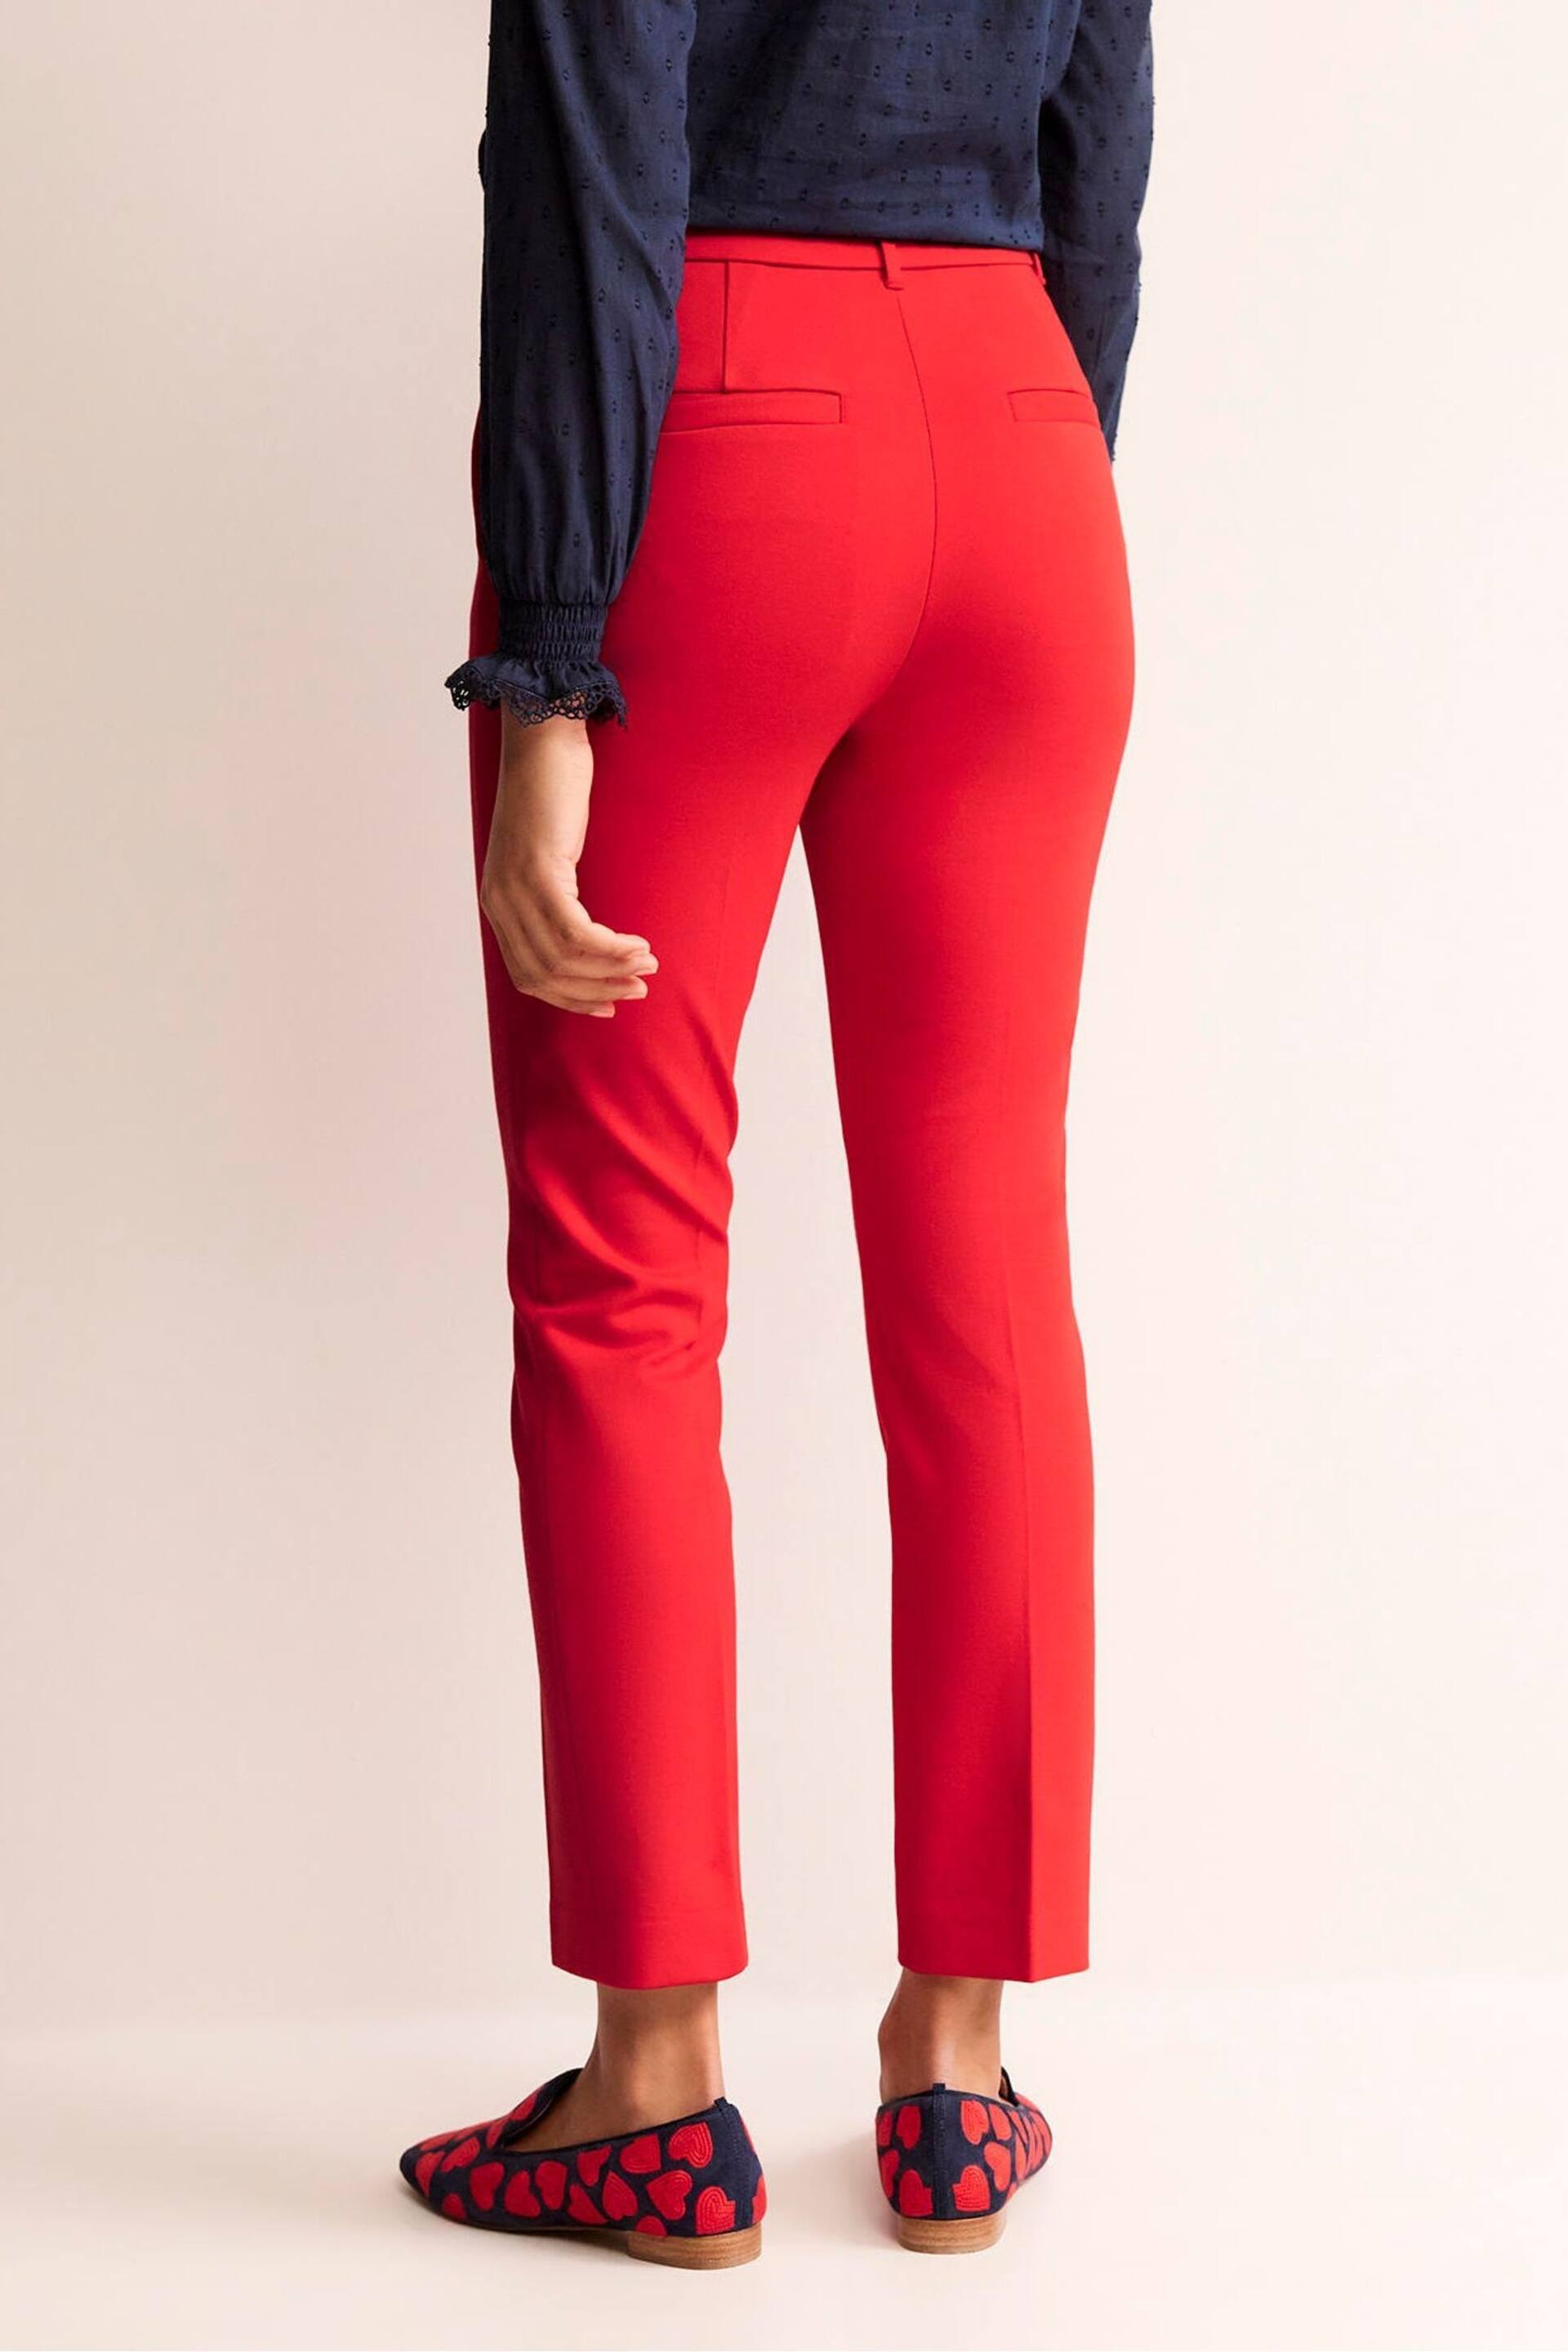 Boden Red Highgate Ponte Trousers - Image 2 of 5